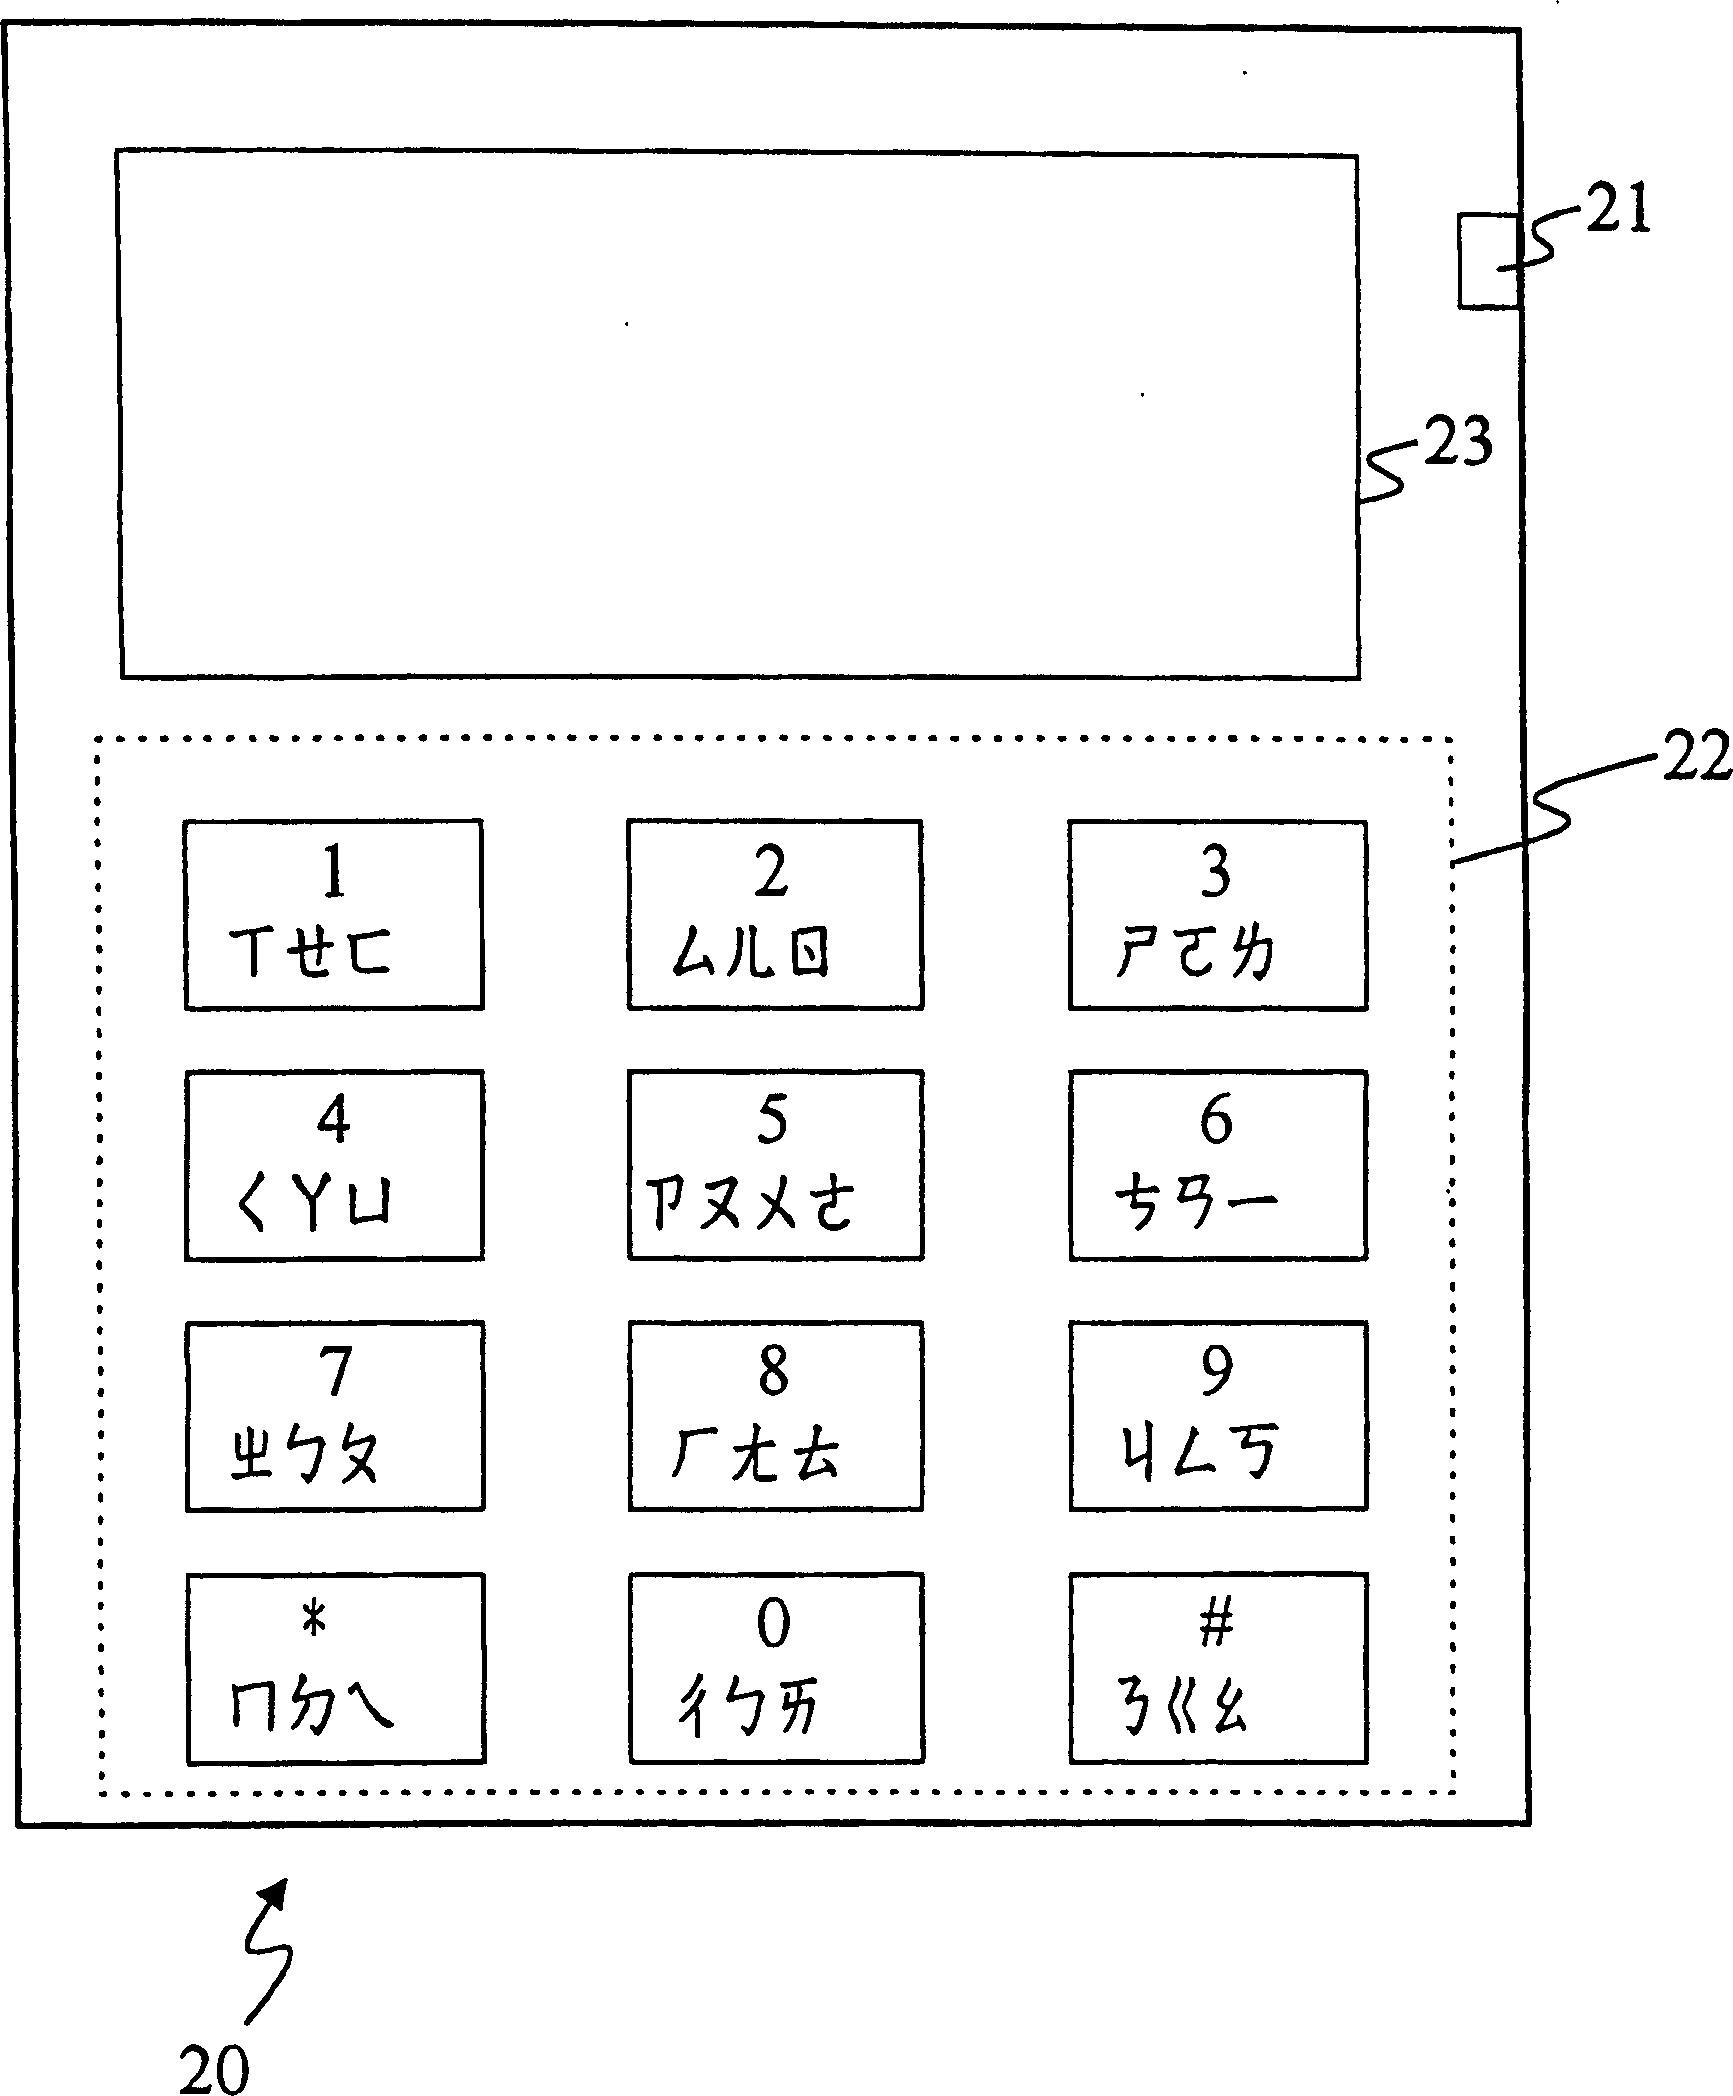 Electronic apparatus and method for speech inputting, identifying and displaying of east words